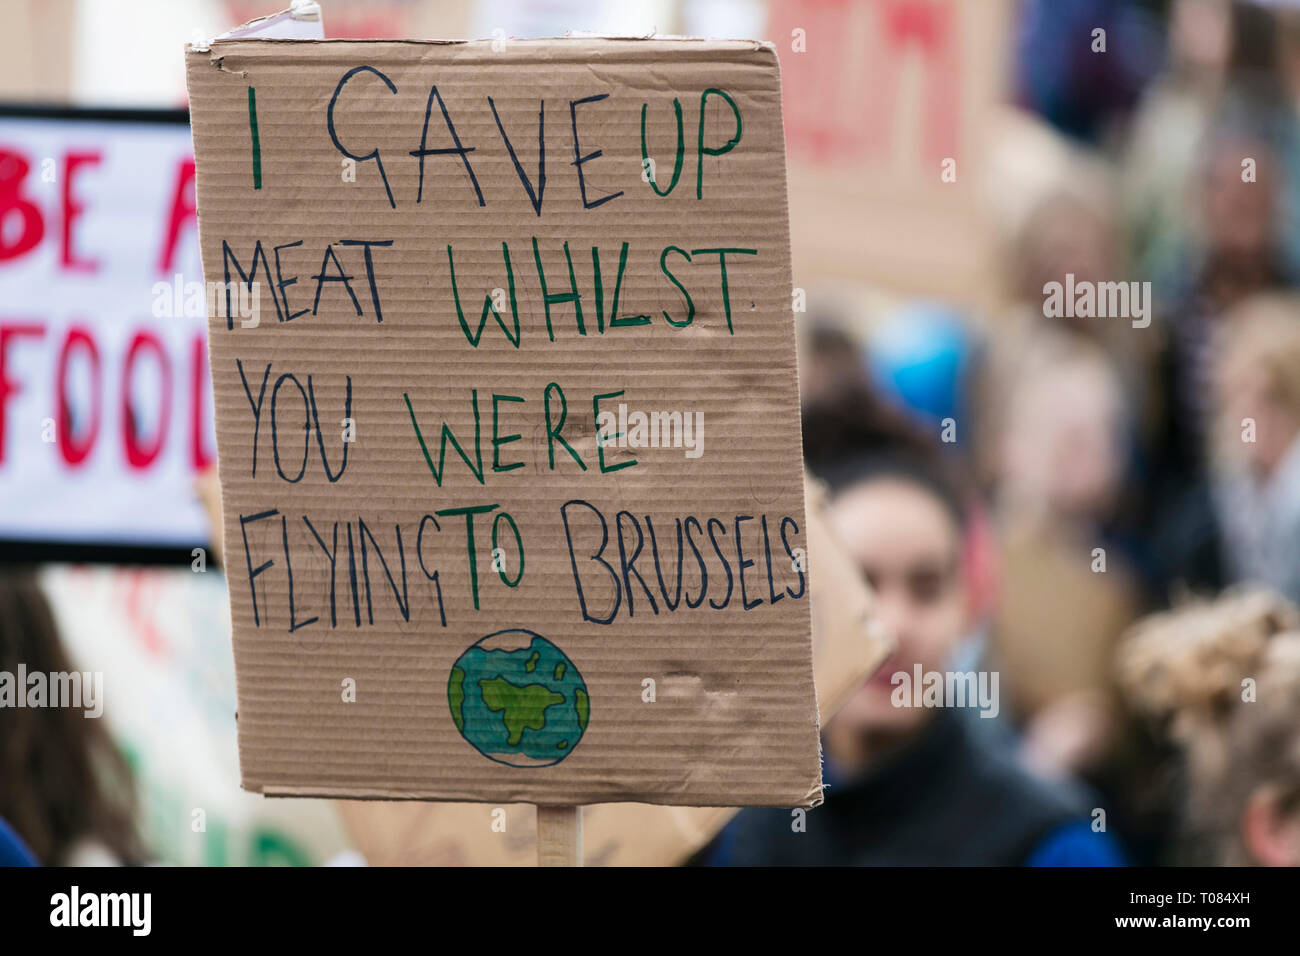 People with banners protest as part of a climate change march Stock Photo